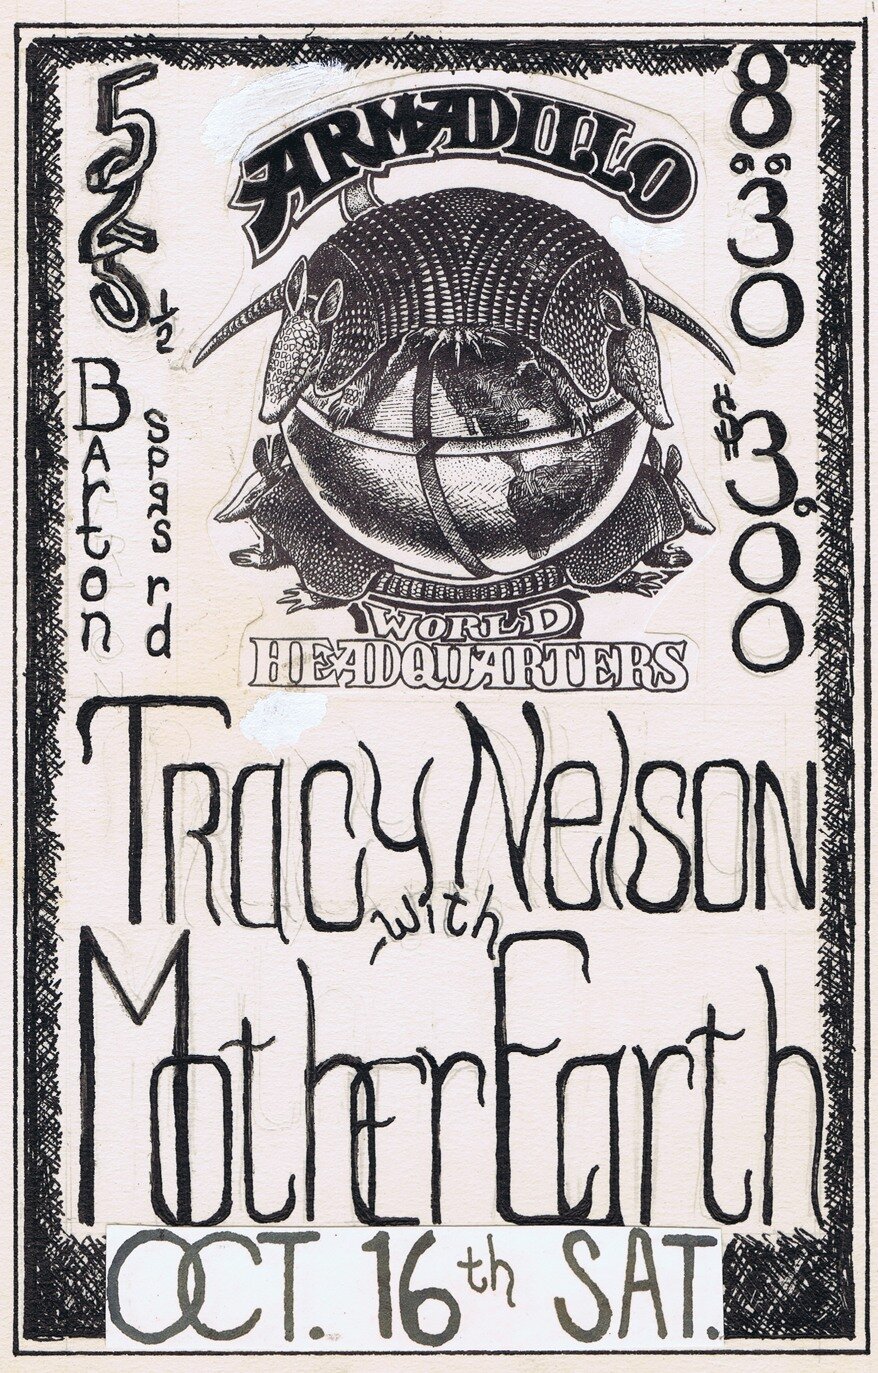 Tracy Nelson with Mother Earth, October 16, 1971, Jim Fanklin